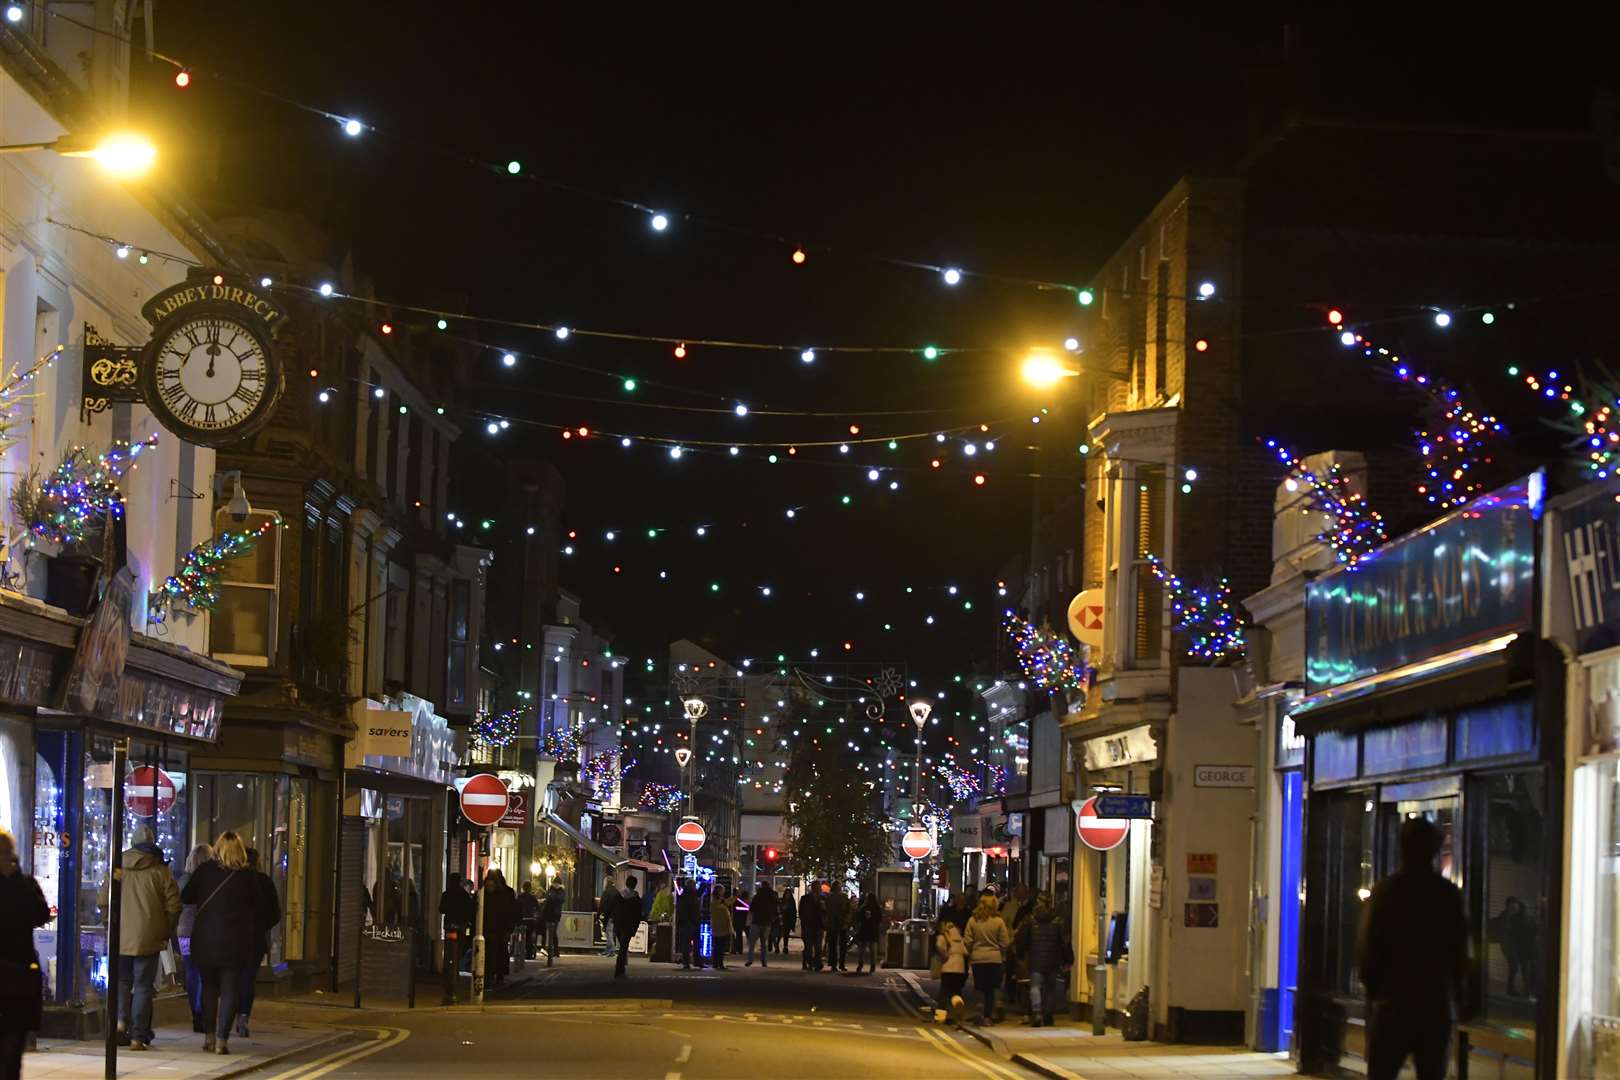 The Chamber say the trees are a tradition and highlight of the town's display. Picture: Tony Flashman